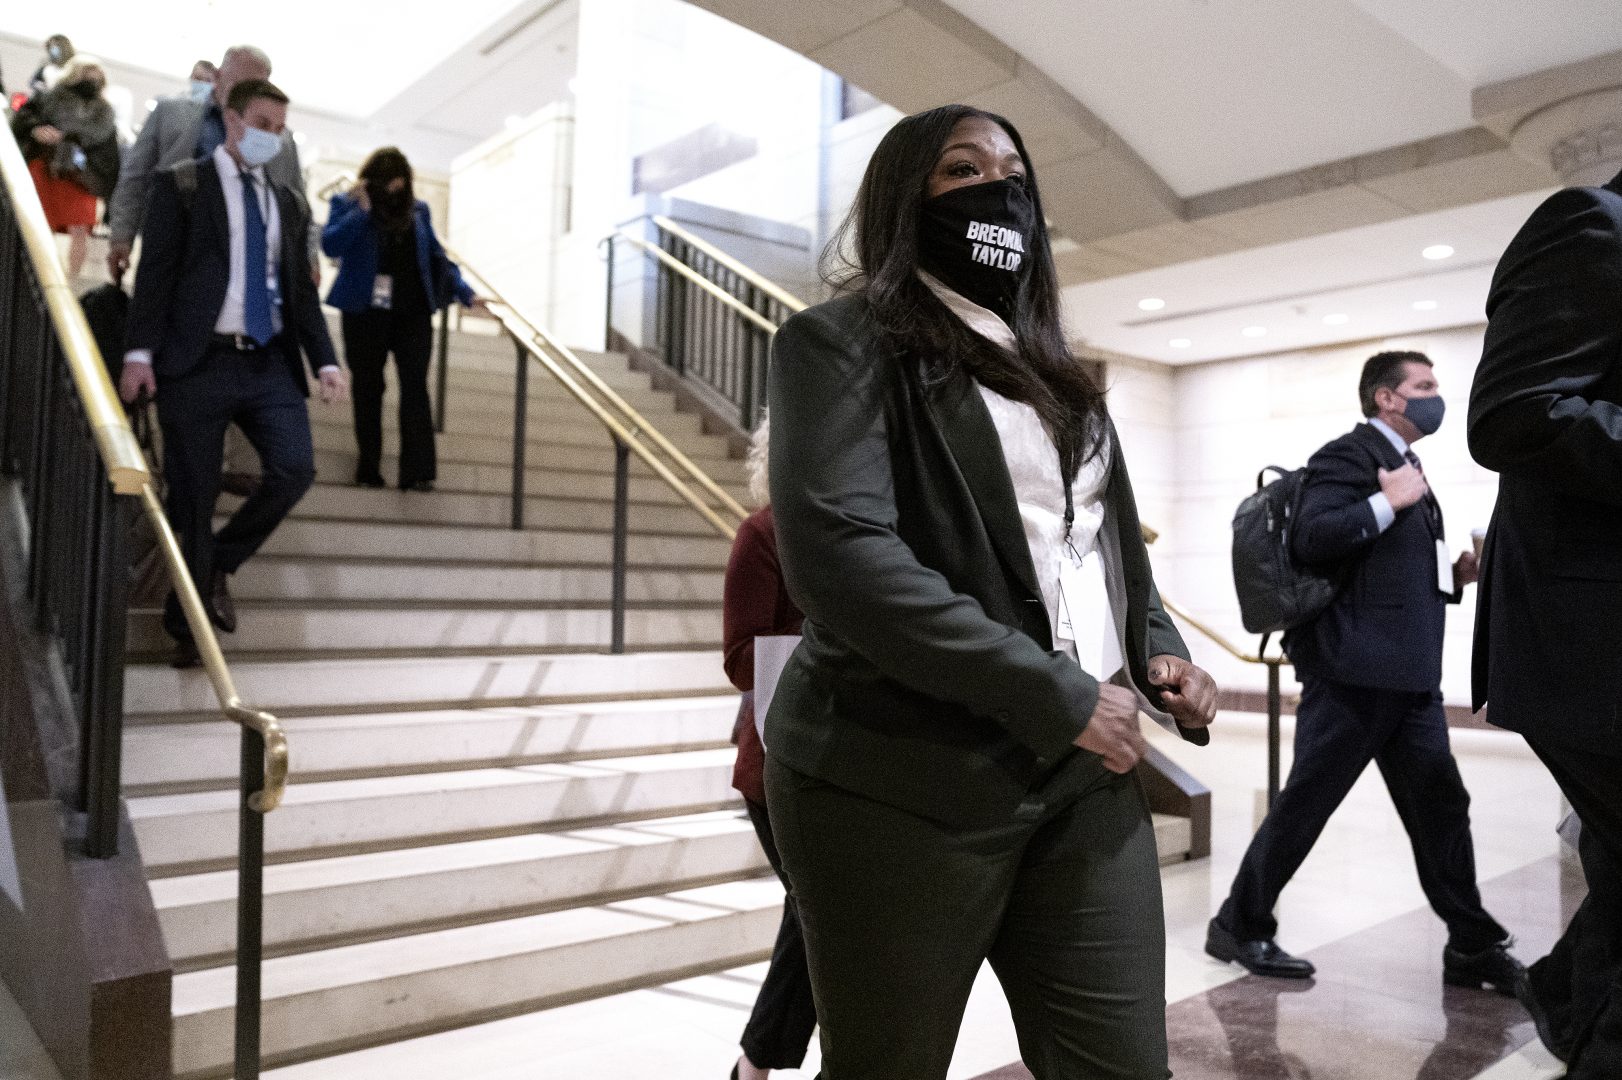 Representative-elect Cori Bush, a Democrat from Missouri, center, wears a protective mask while arriving to a new member briefing at the U.S. Capitol in Washington, D.C., U.S., on Friday, Nov. 13, 2020. With the pandemic raging the circumstances dictated that this orientation for the Republicans and Democrats elected last week bore little resemblance to previous sessions of introductions and briefings marked by plenty of glad-handing.